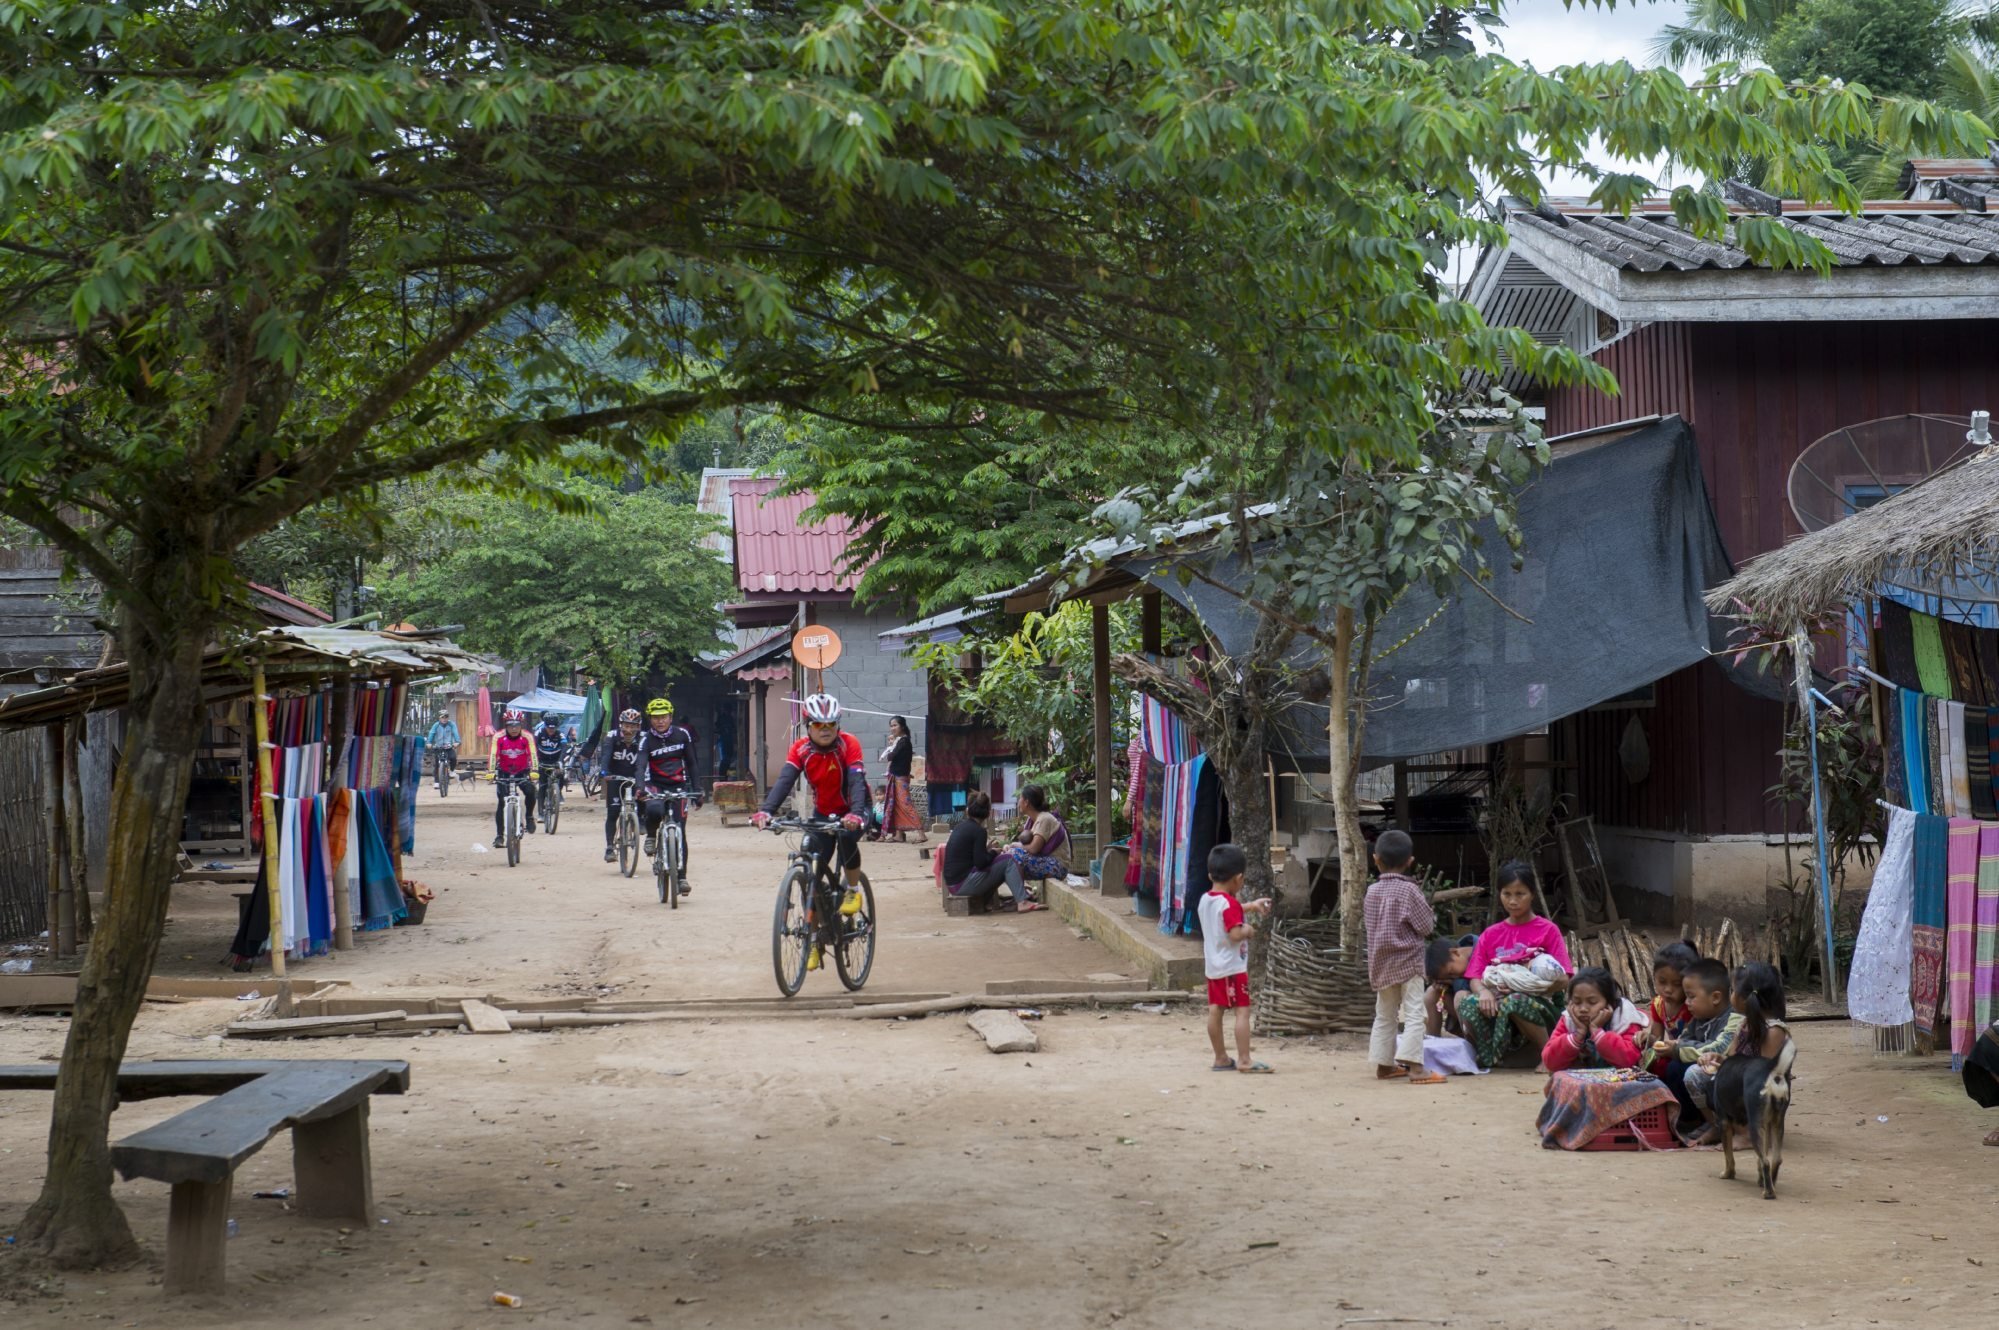 Cyclists ride through a cultural heritage village in Central Laos. The Laotian economy remains fragile, with Chinese investment so far only adding to its debt burden. Photo: Avalon/Universal Images Group via Getty Images